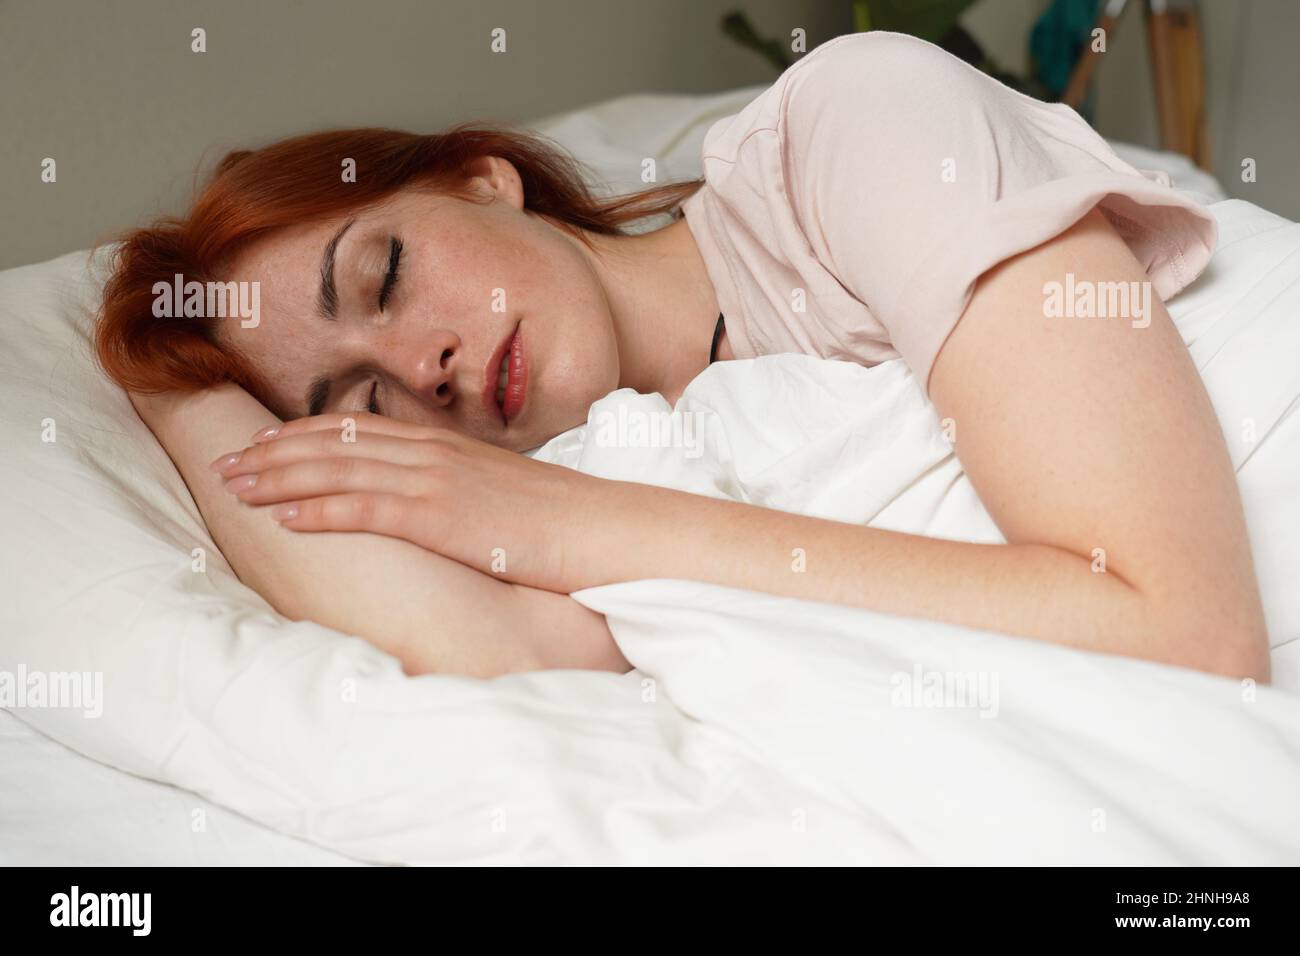 young woman in bed sleeping or napping during daytime Stock Photo